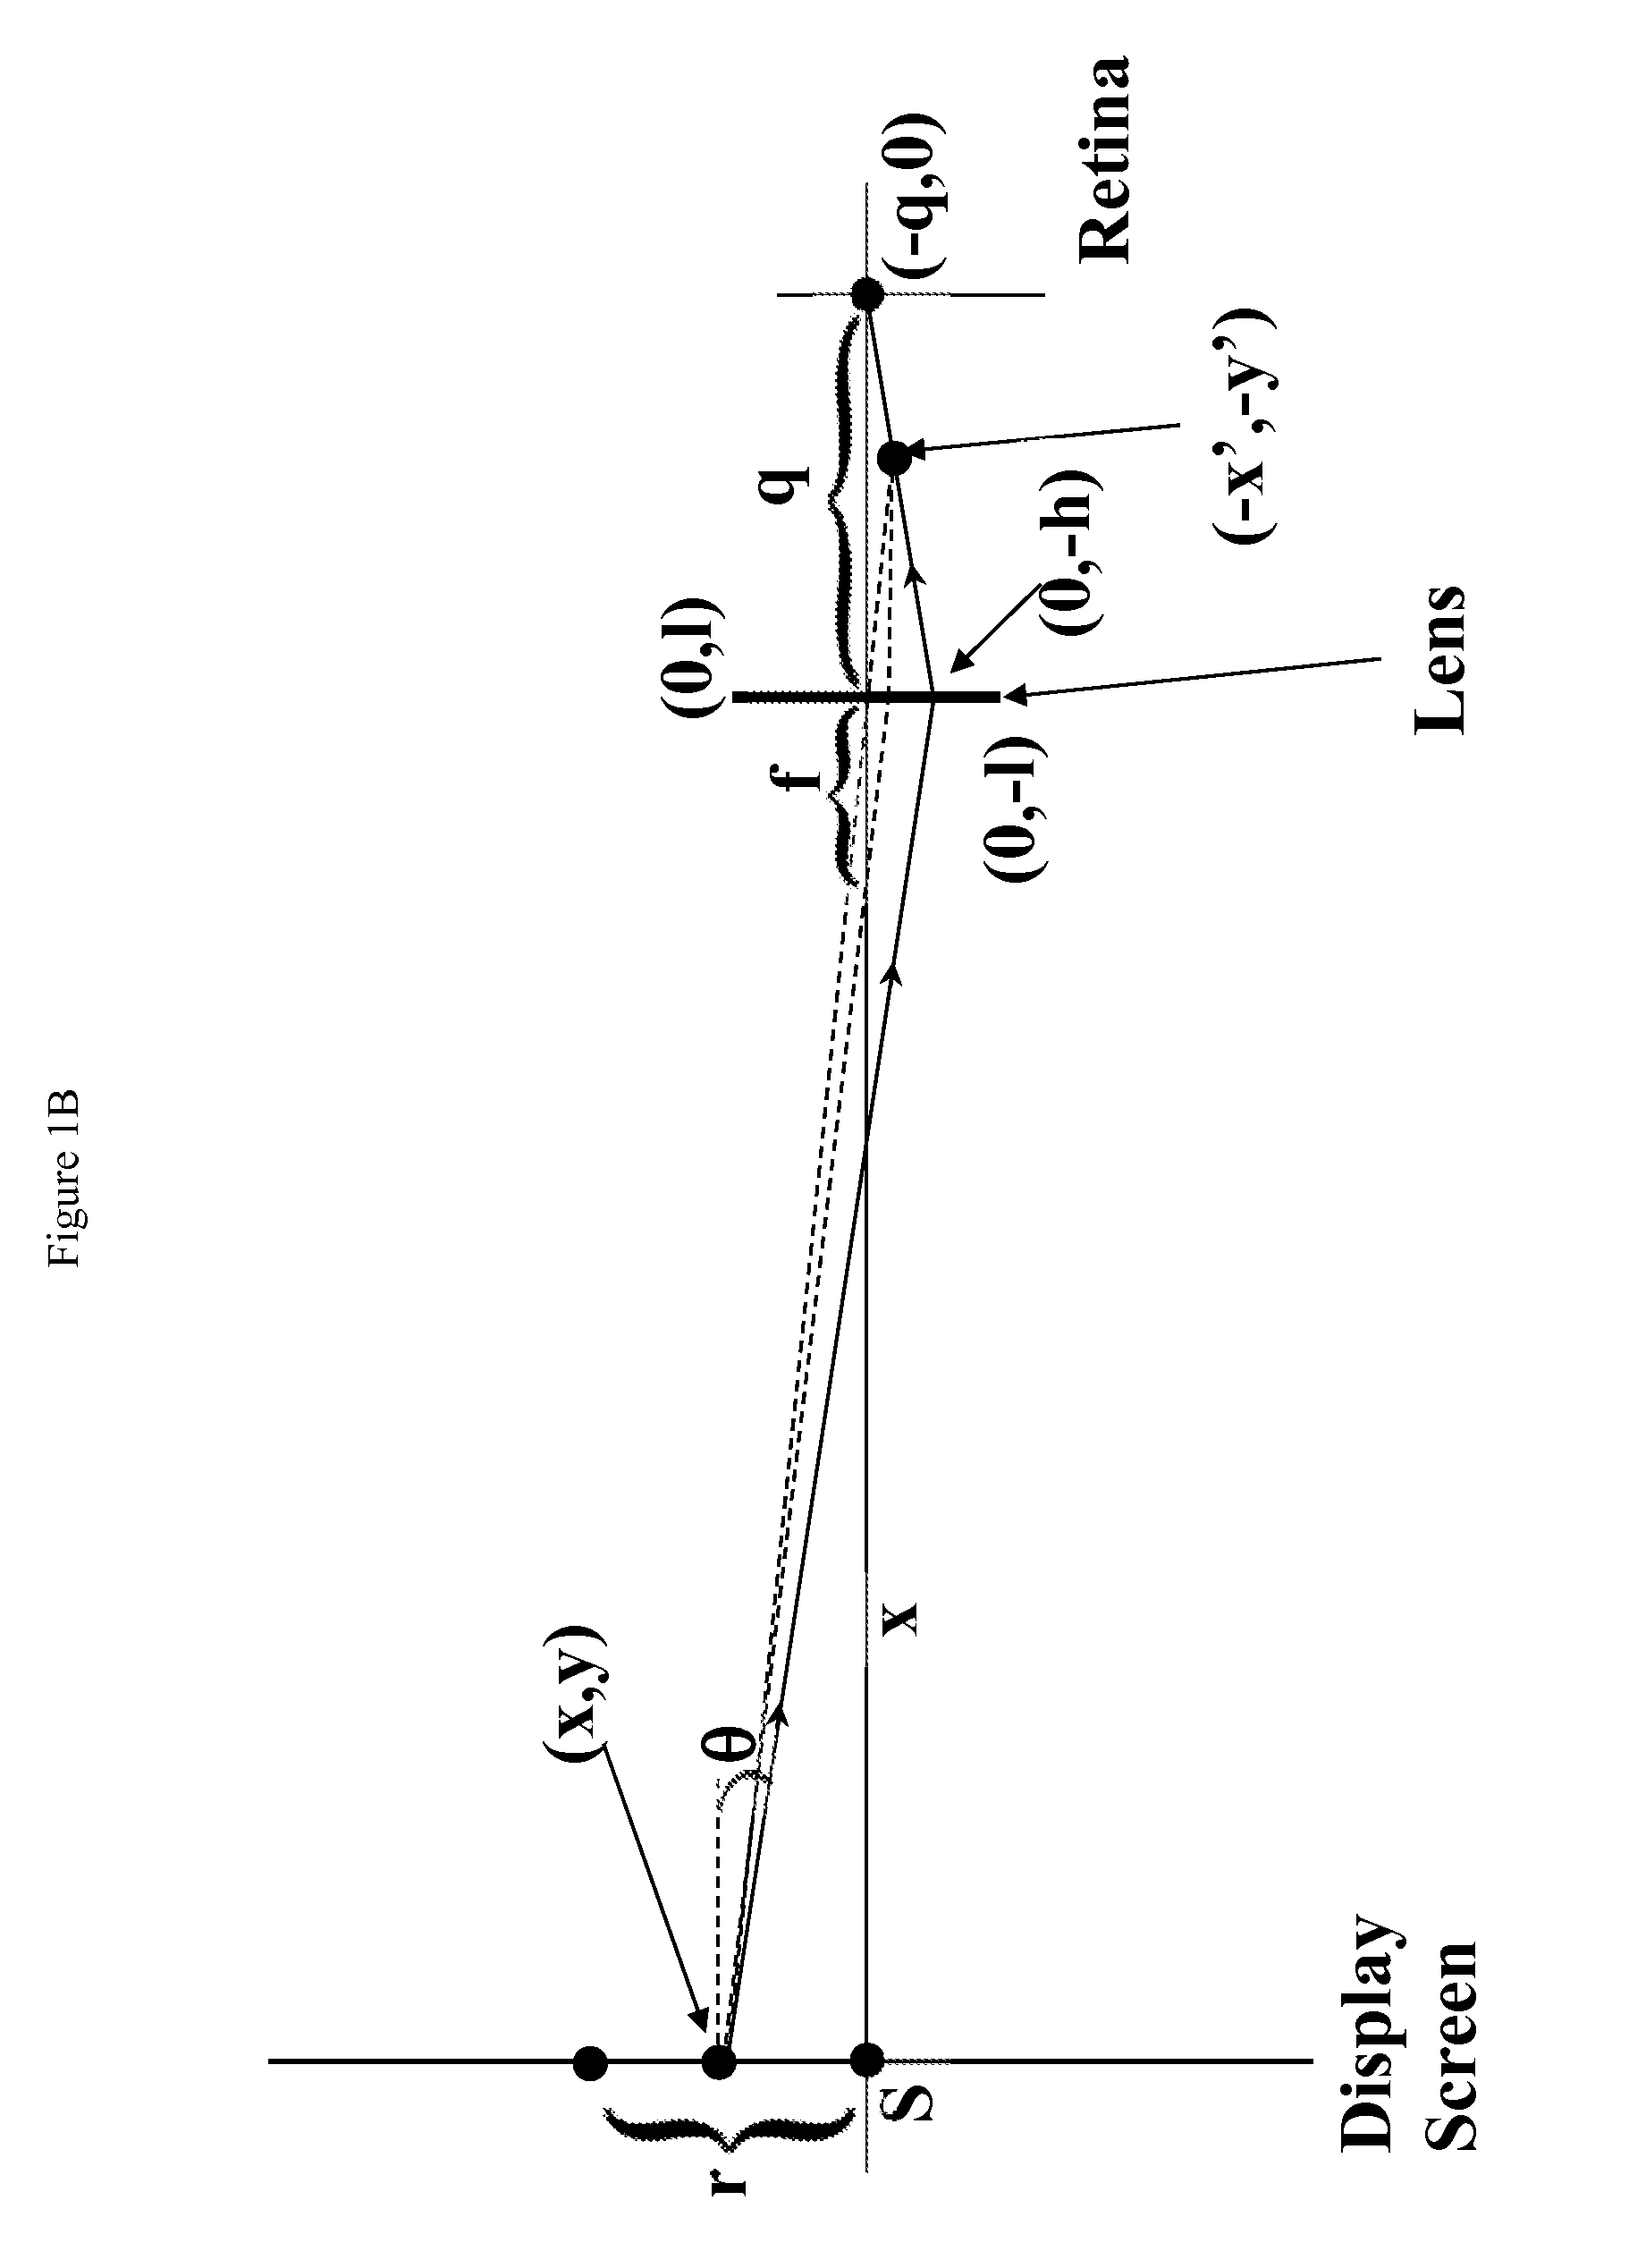 System and method for using digital displays without optical correction devices